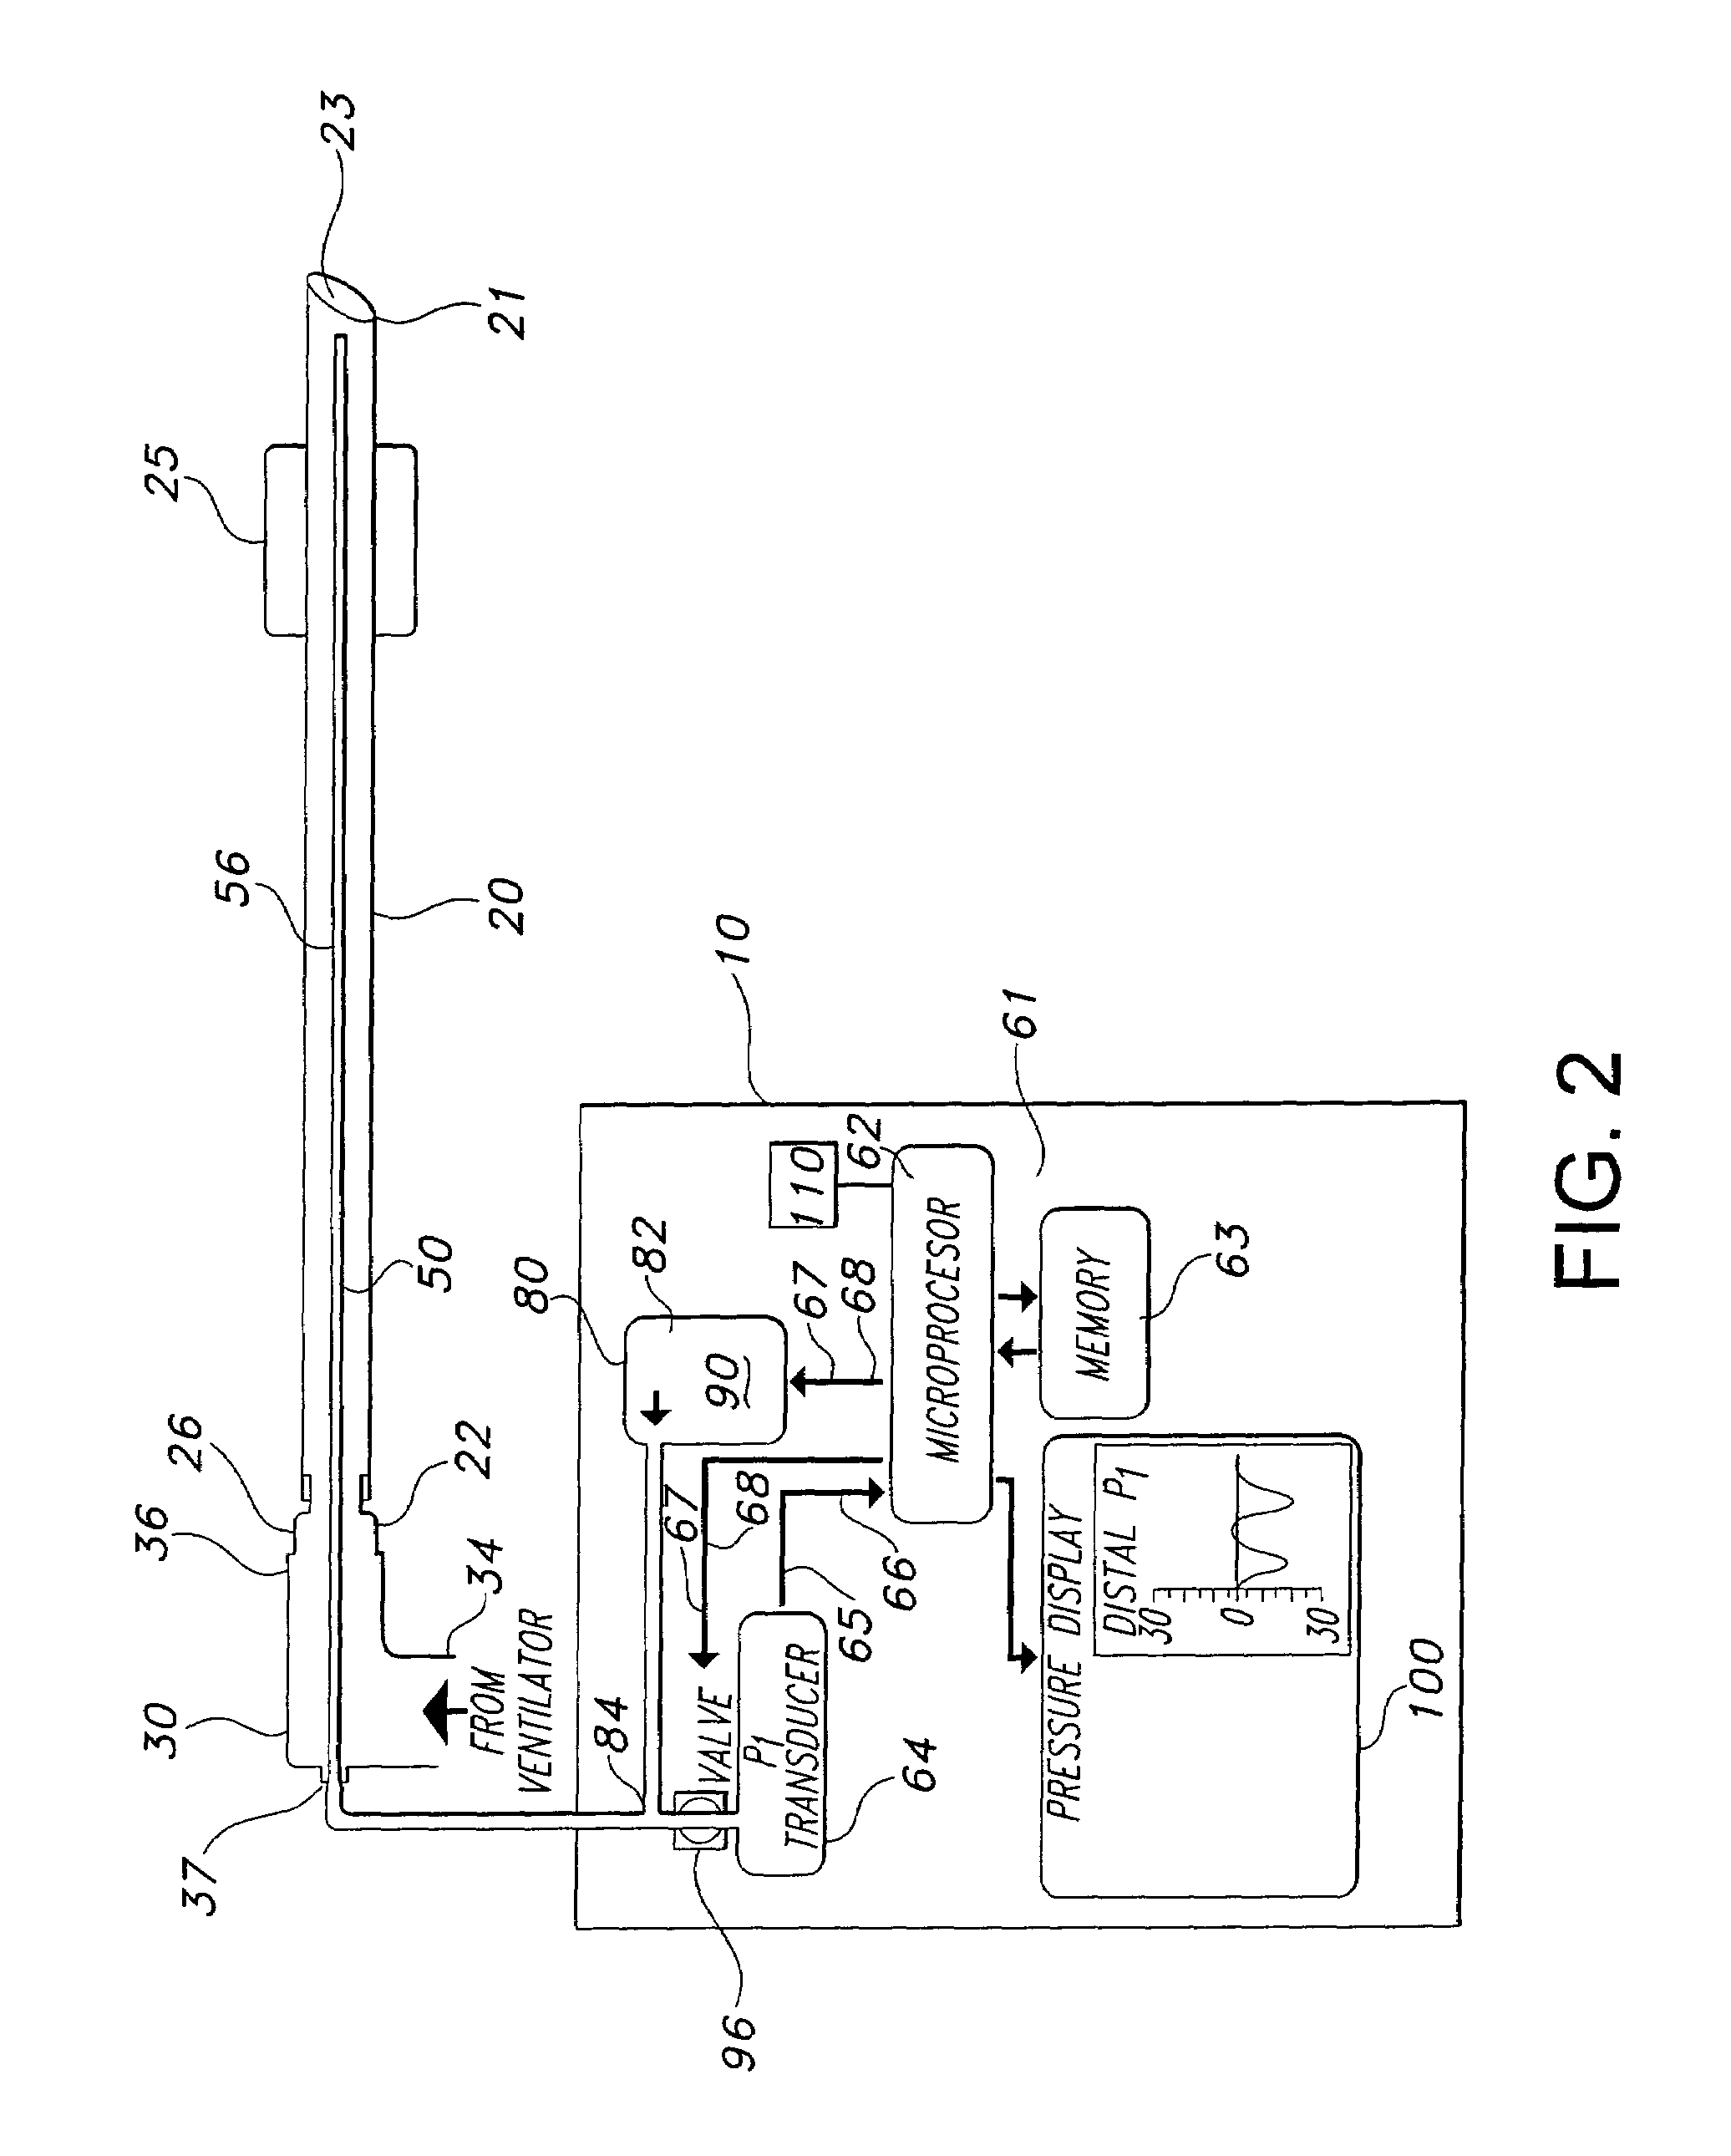 Endotracheal tube pressure monitoring system and method of controlling same